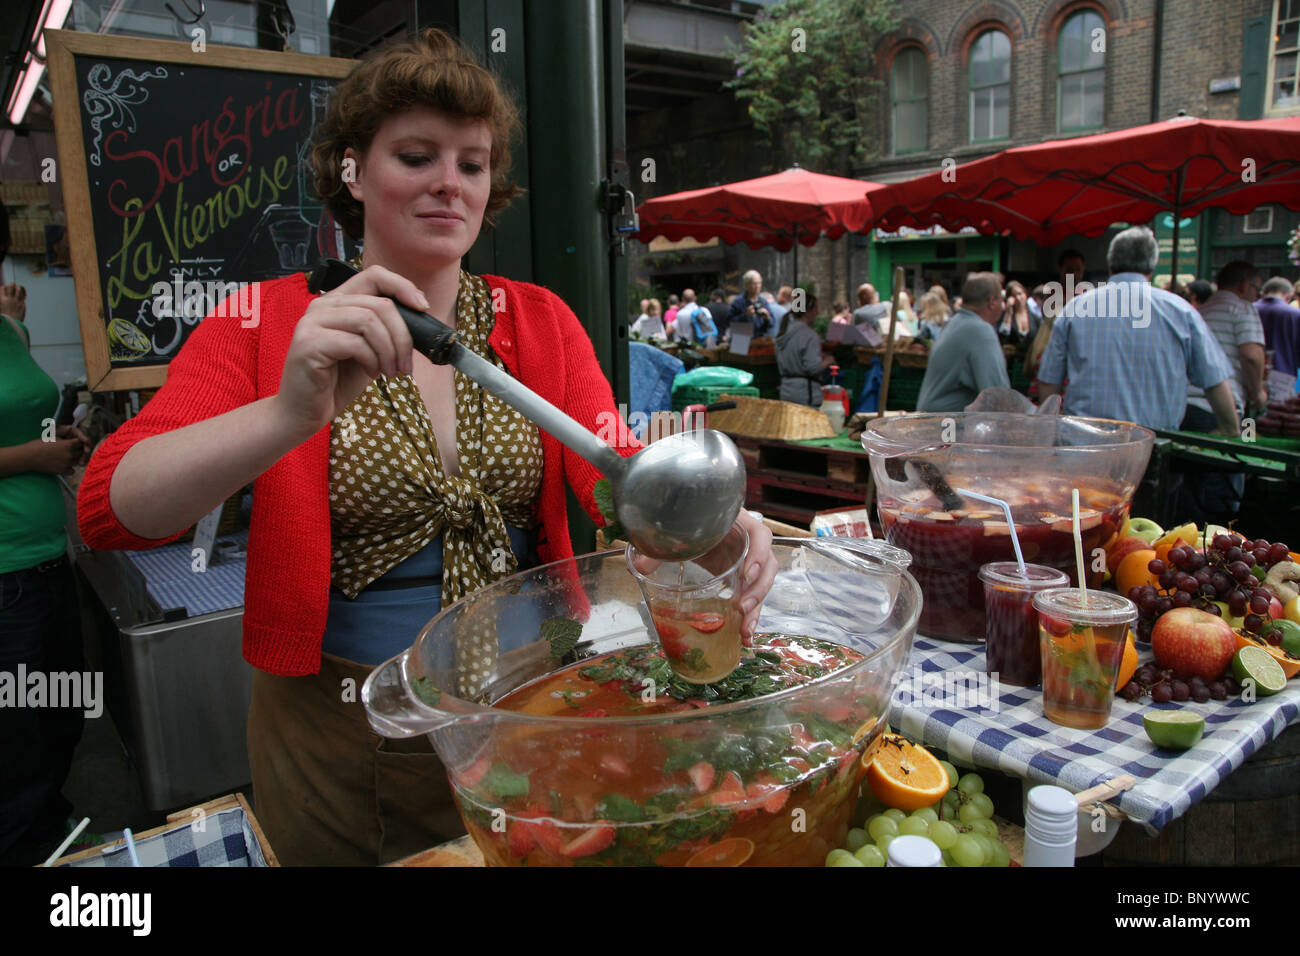 Punch being prepared at Borough Market, south east London Stock Photo